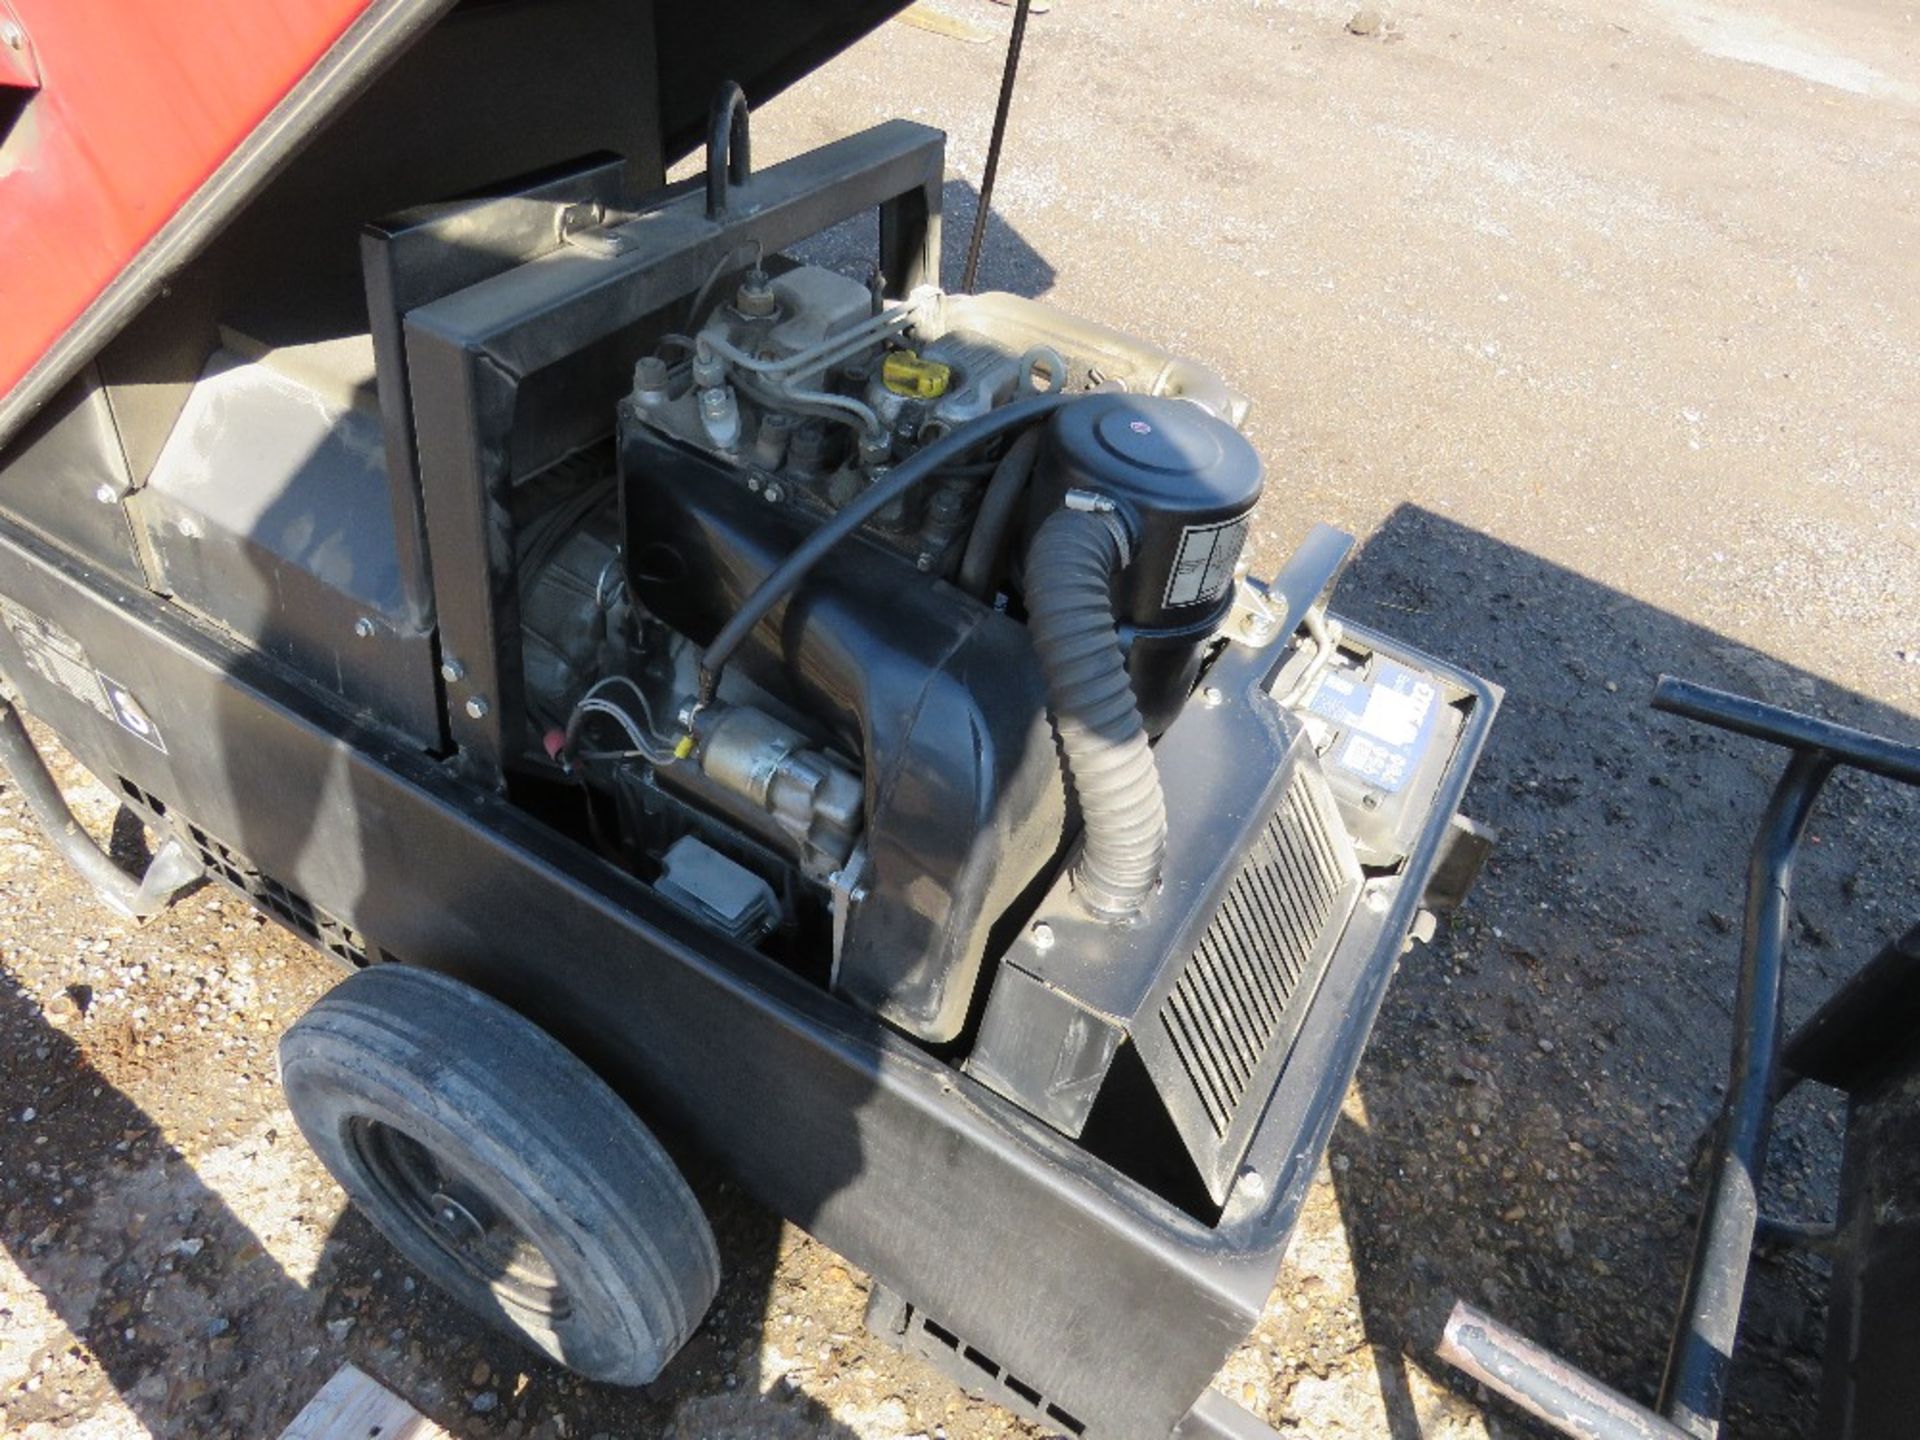 MOSA TS300 BARROW GENERATOR. WHEN TESTED WAS SEEN TO RUN AND SHOWED POWER. DIRECT FROM LOCAL COMPANY - Image 6 of 7